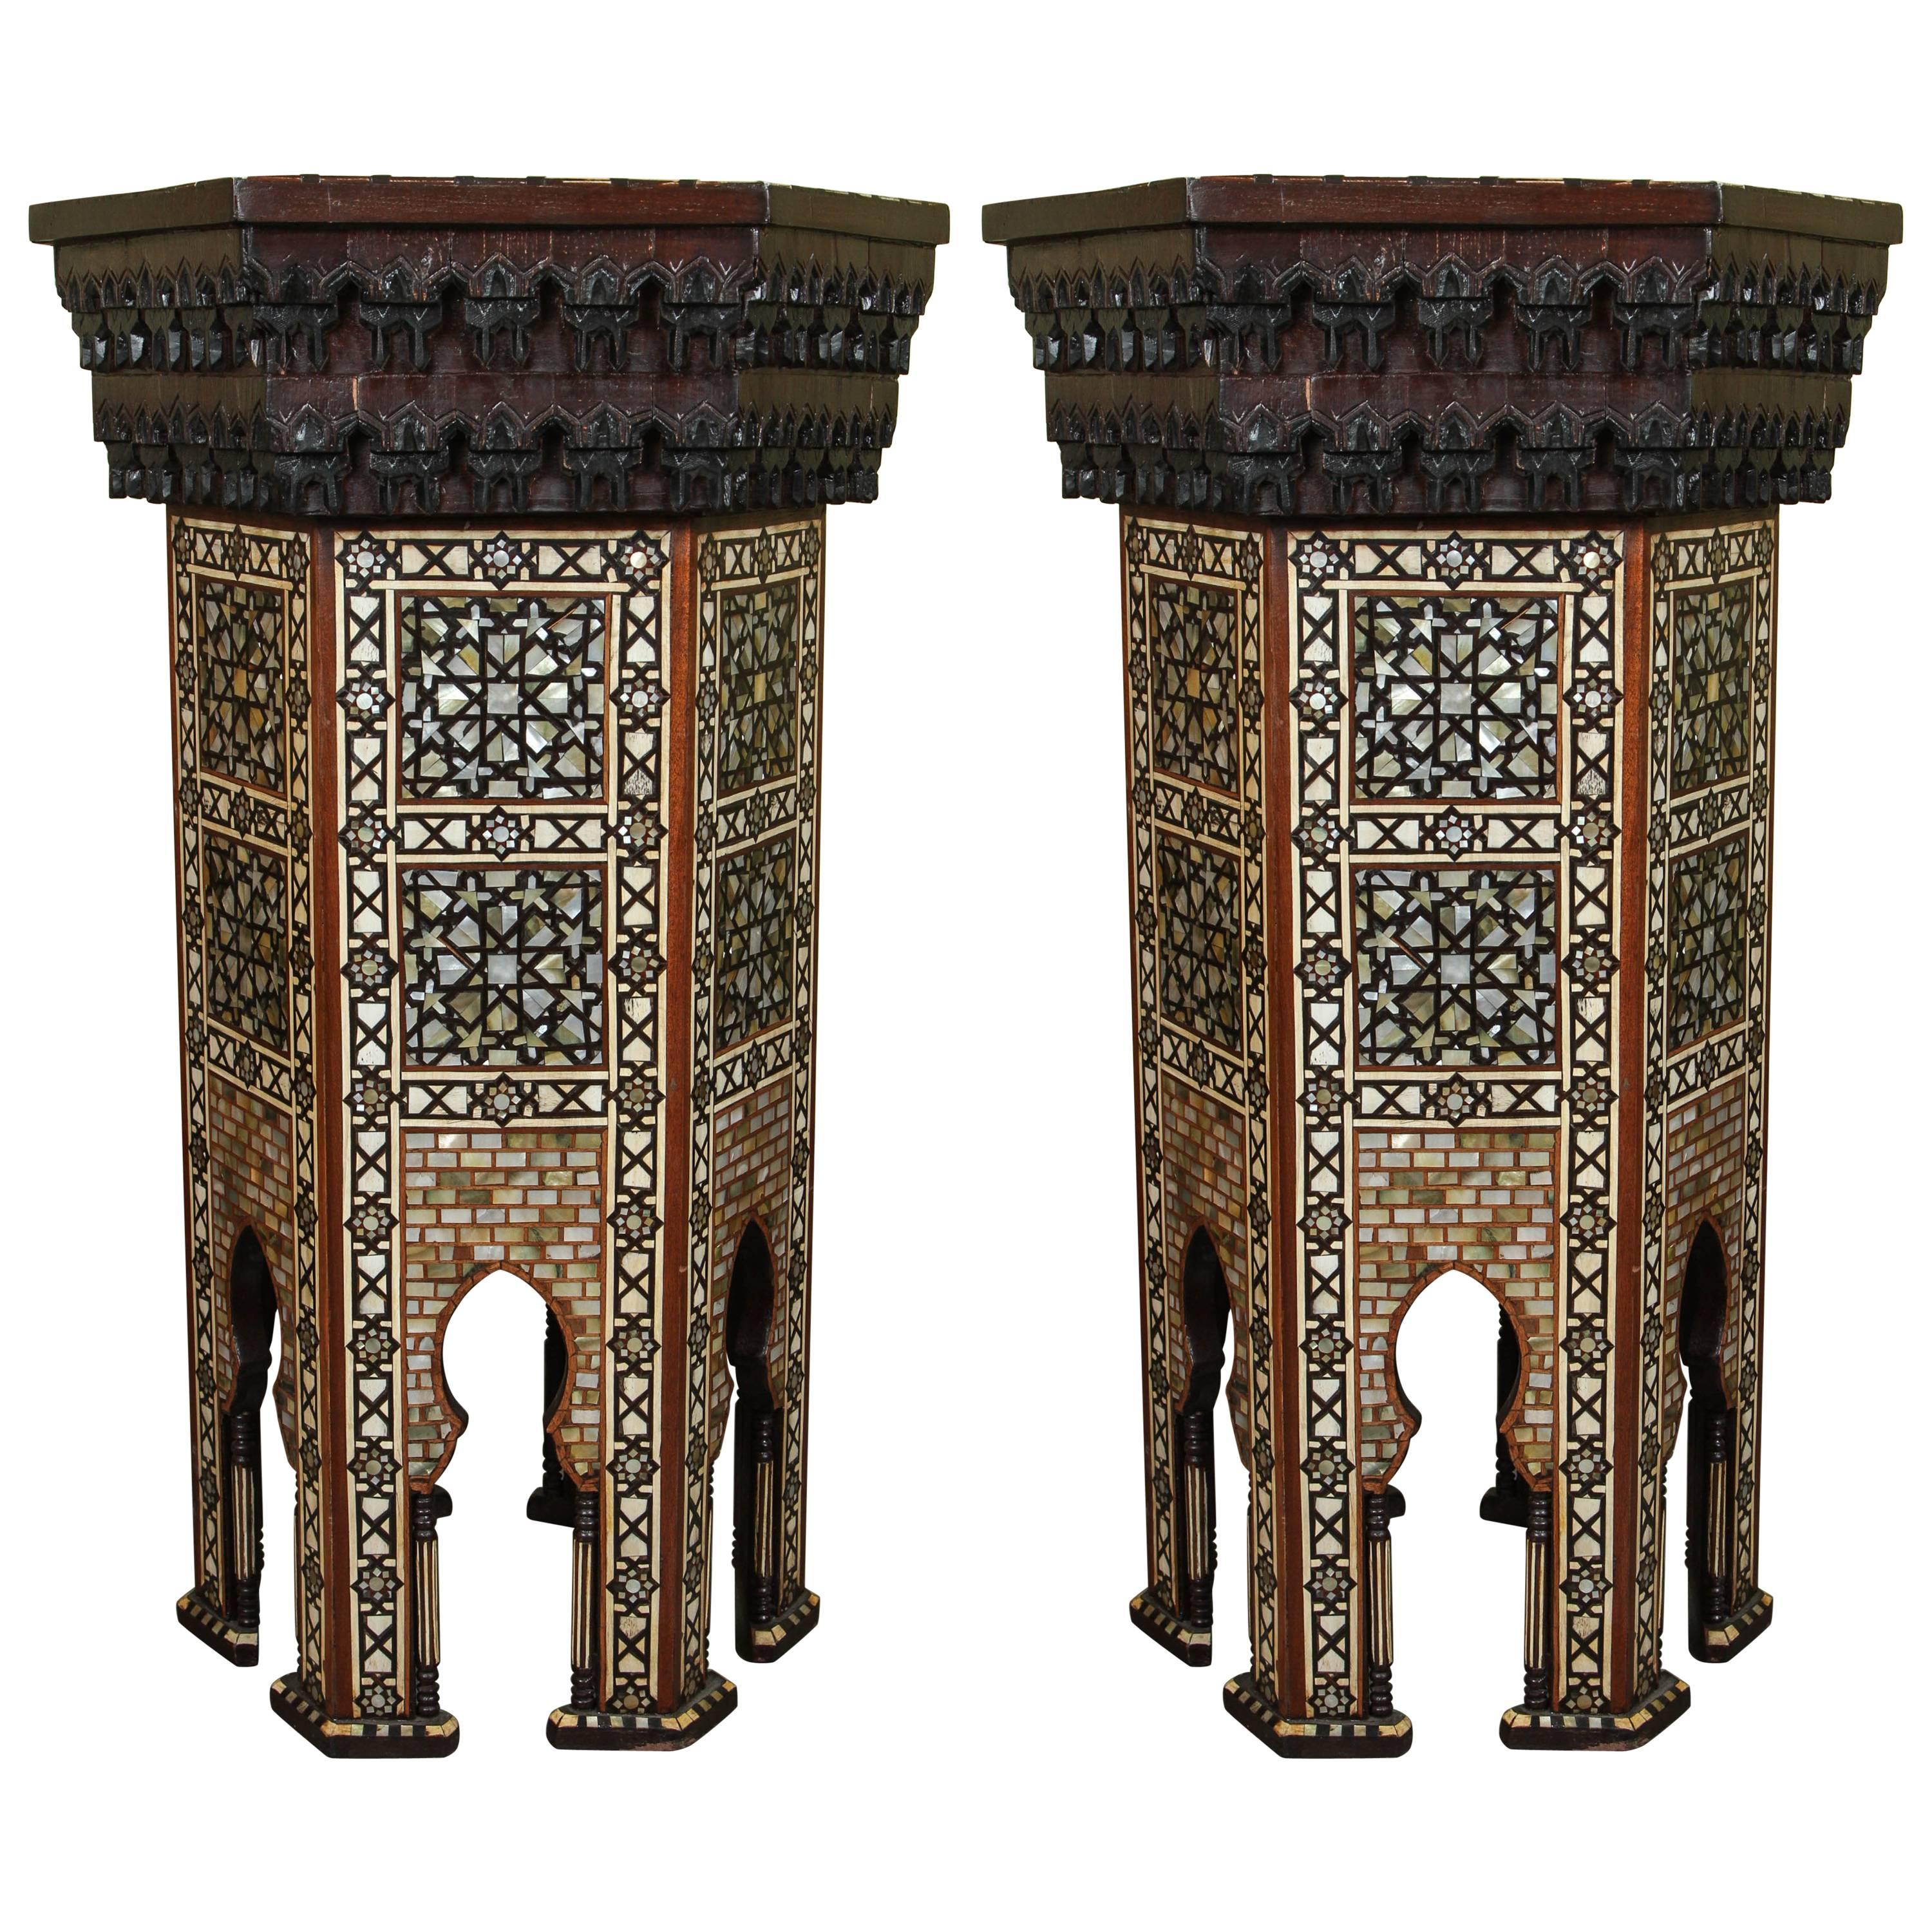 A Fine Pair of Moorish Mother-of-Pearl Inlaid Hexagonal Stands